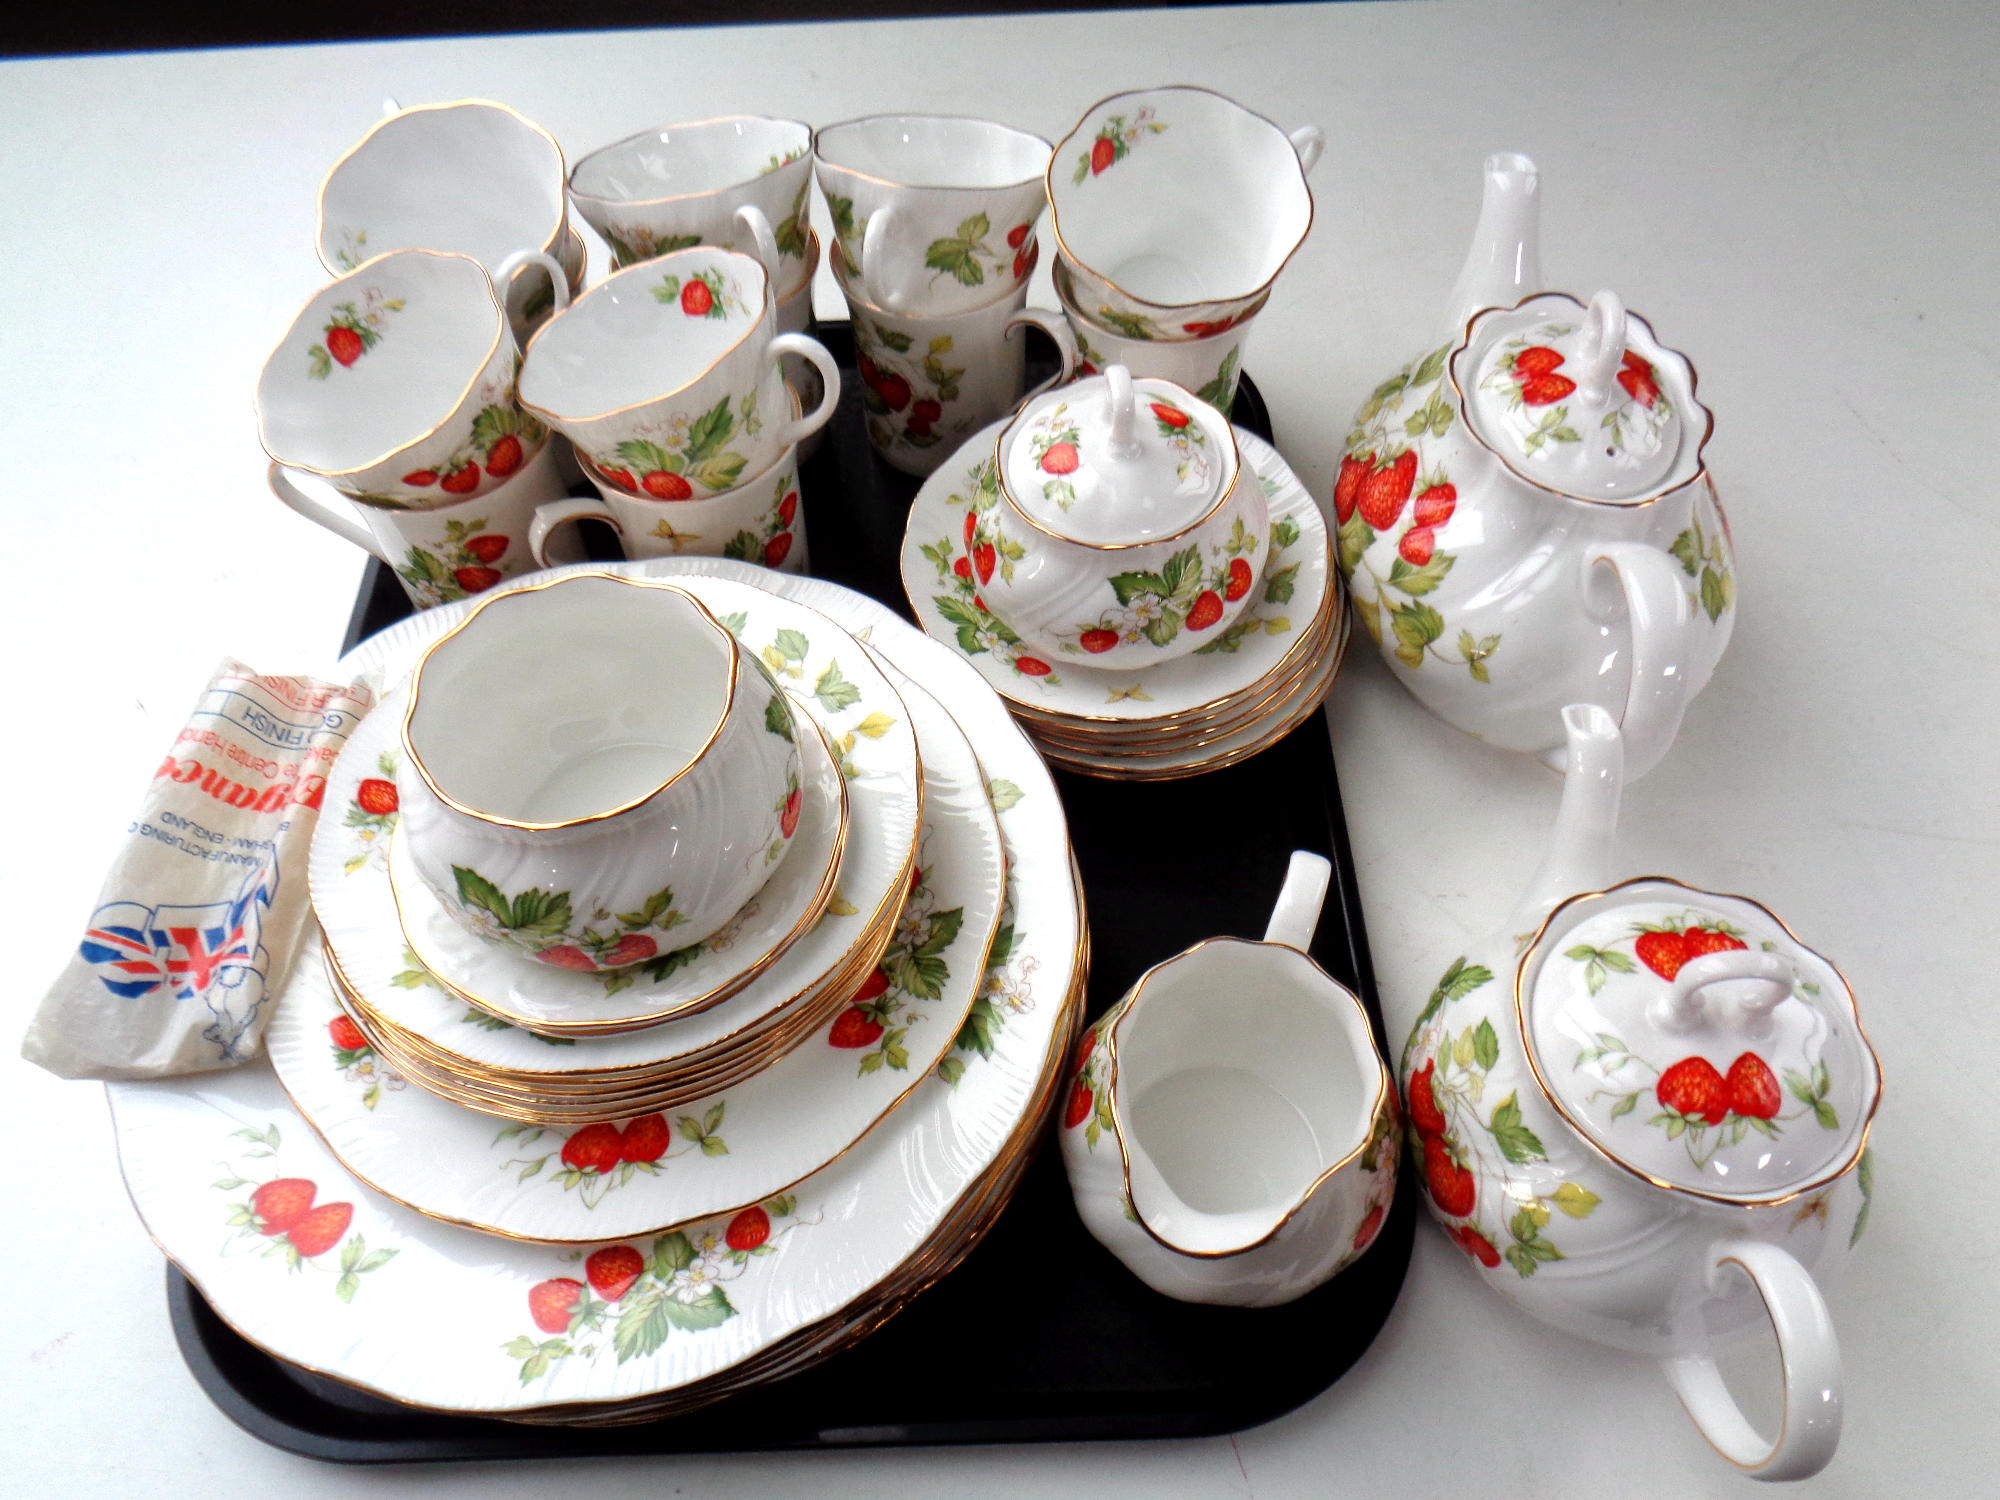 Approximately 39 pieces of Crownford Virginia Strawberry pattern tea and dinner china made